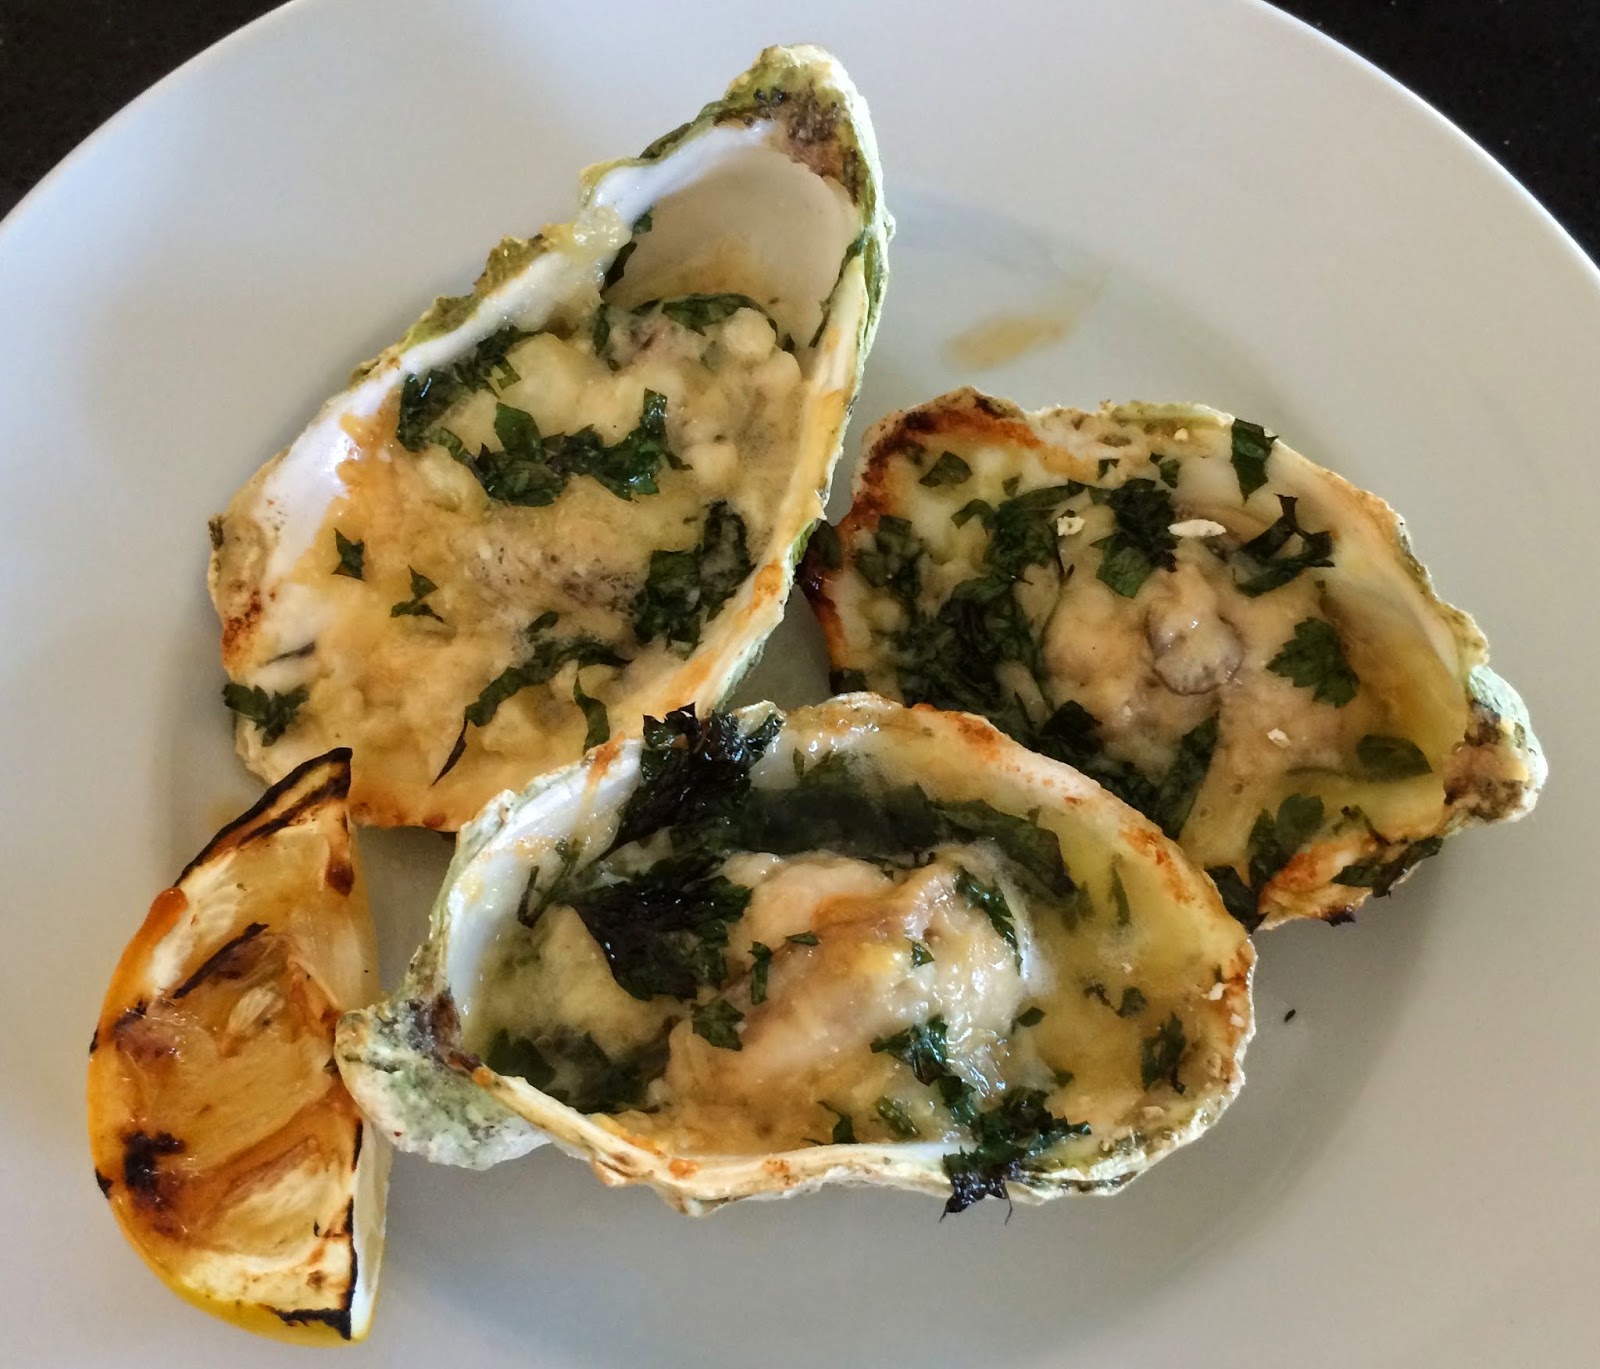 Fresh From Nancy's Garden: BBQ'd Louisiana Style Oysters In A